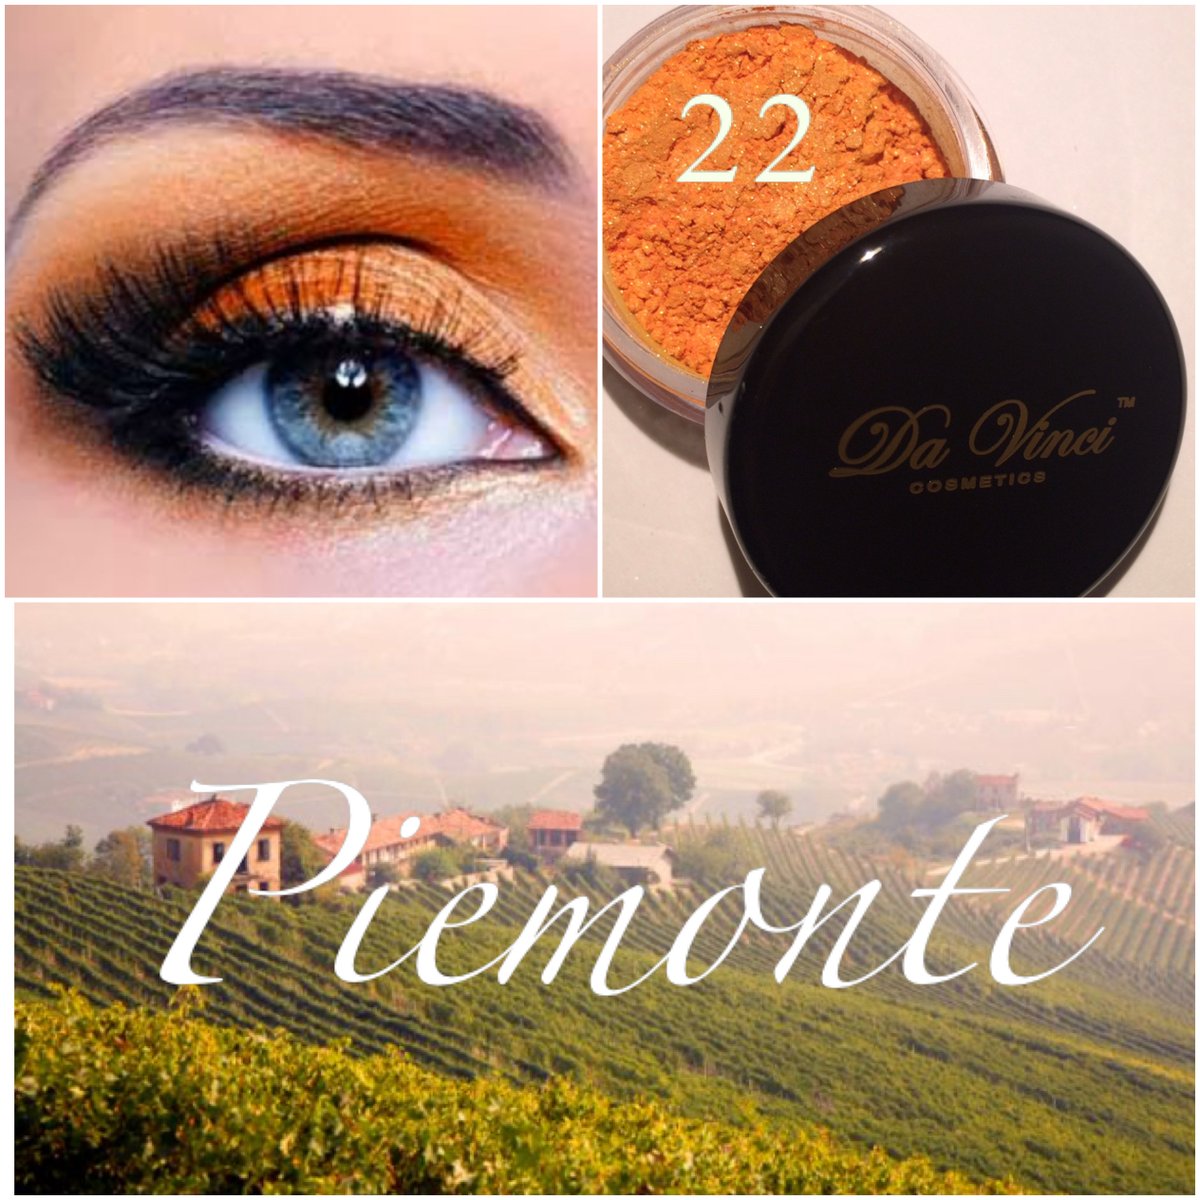 Get this orange eye shadow look with Da Vinci Cosmetics Mineral Eye Shadow #22 Piemonte. Matte orange color shadow , ideal for the person that love orange makeup. $19.90 USD